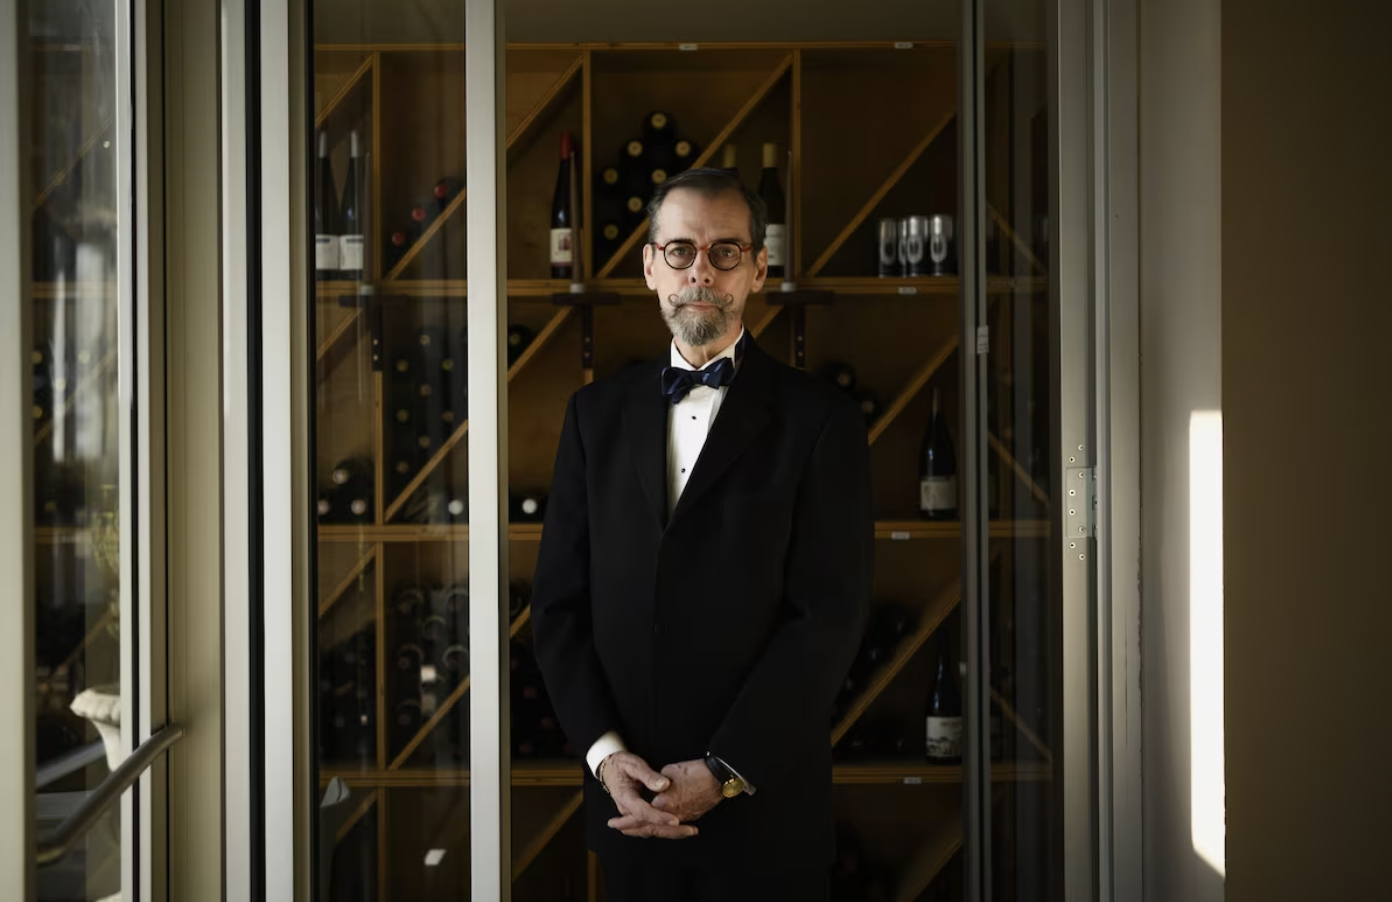 A butler for a modern era: The Globe and Mail speaks to Christopher Cantlon.